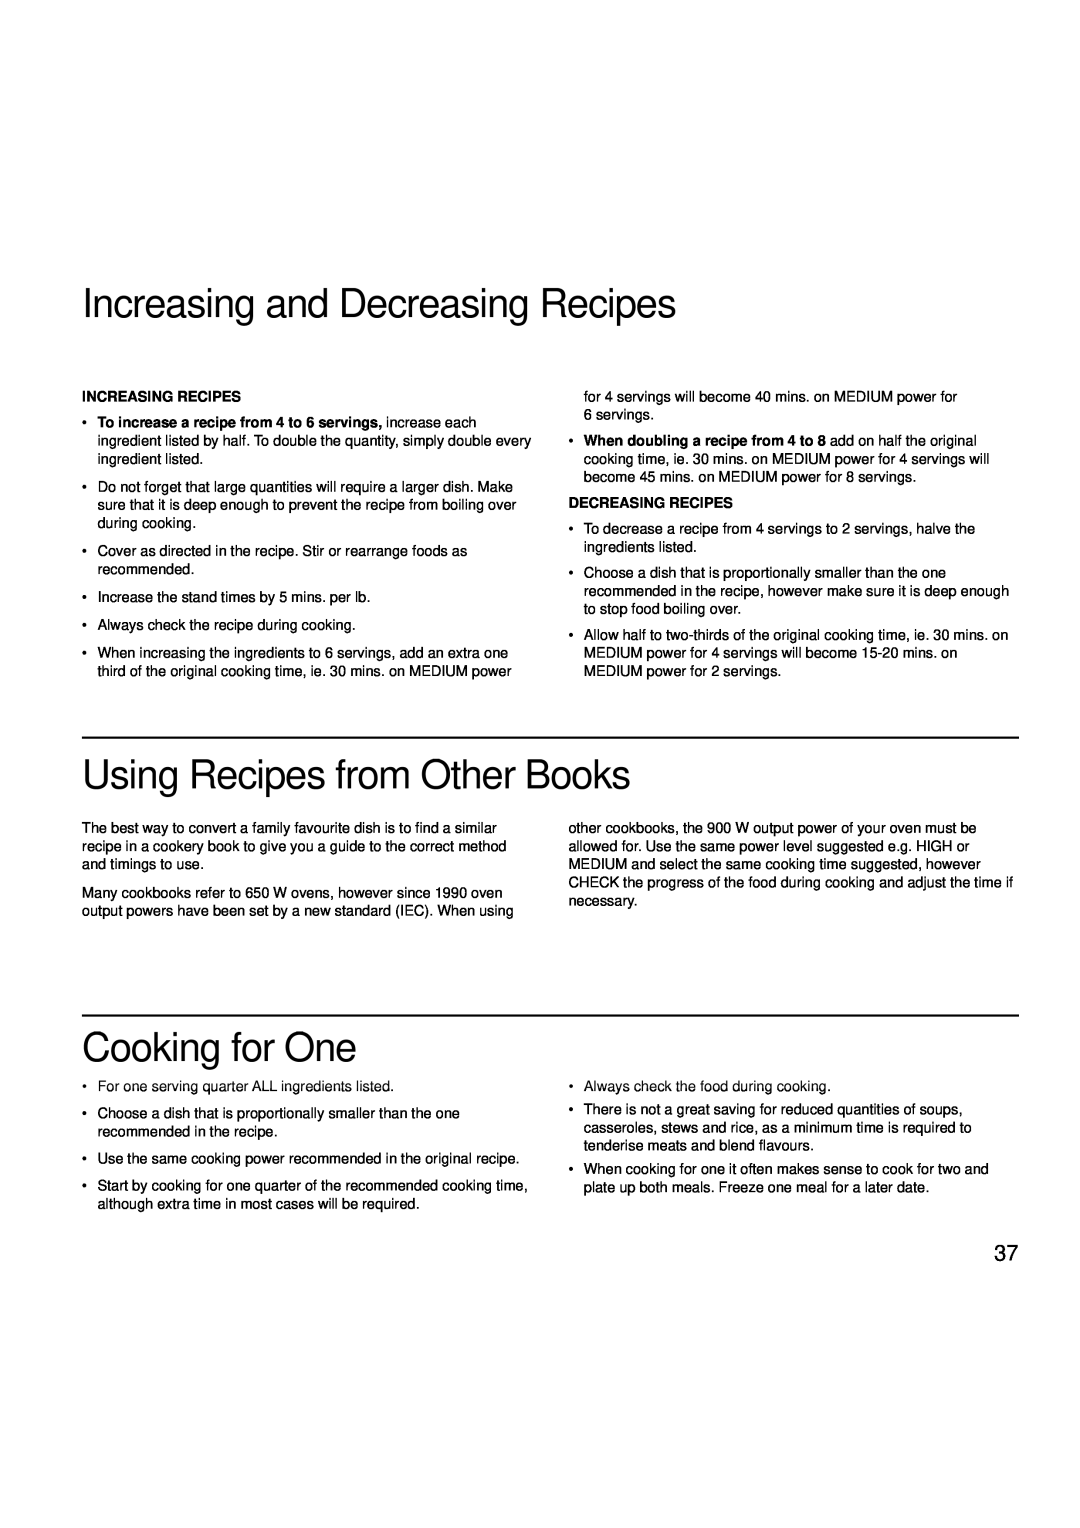 Creda MBO55 manual Increasing and Decreasing Recipes, Using Recipes from Other Books, Cooking for One, Increasing Recipes 